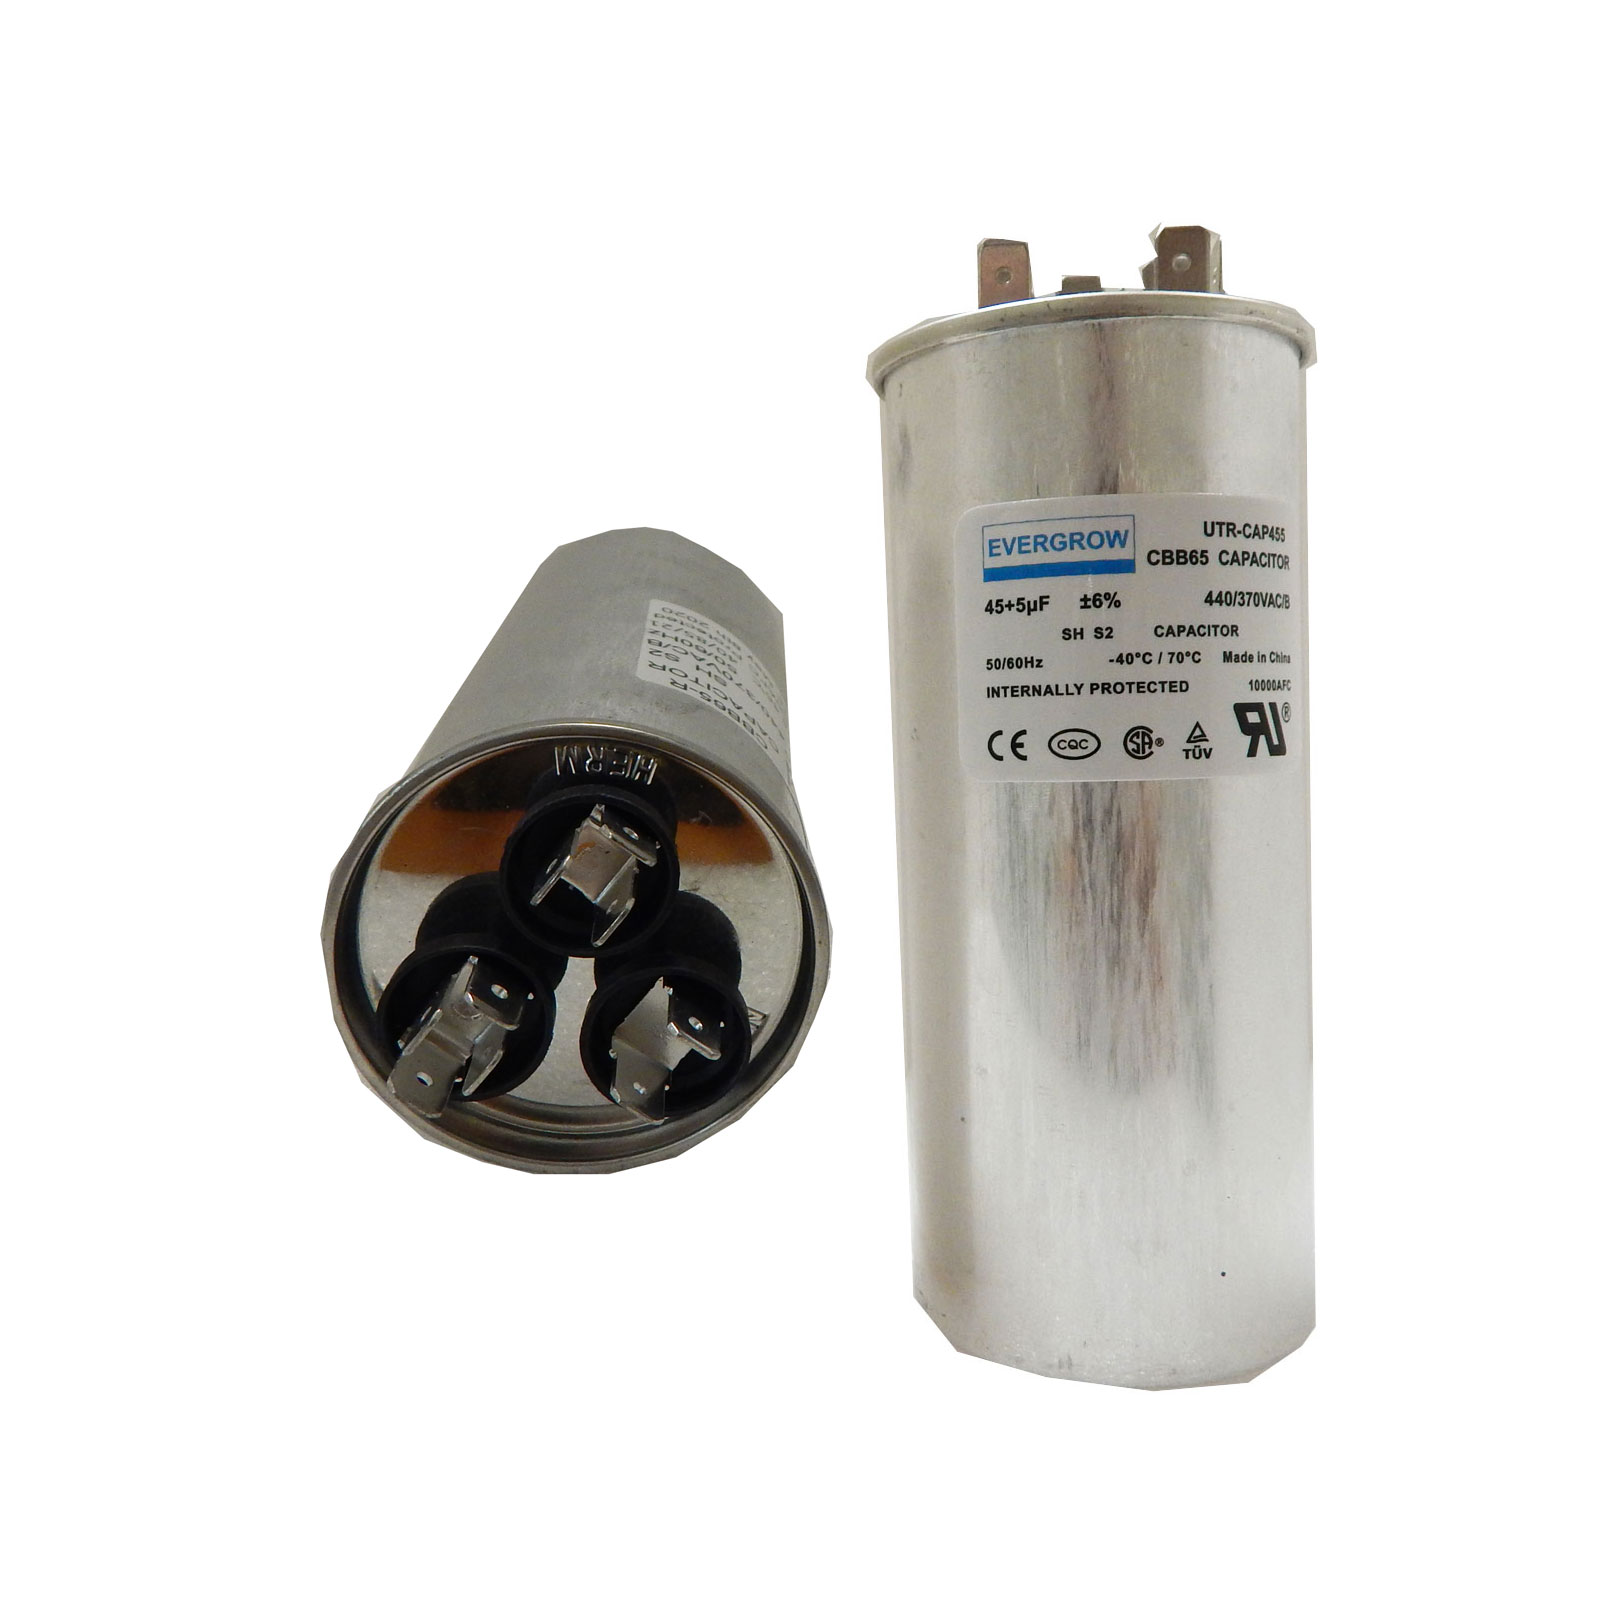 EverGrow Product Title45/5 MFD 370 Volt Dual Round Run Capacitor Replacement for Goodman / Janitrol B9457-7200 - image 3 of 3